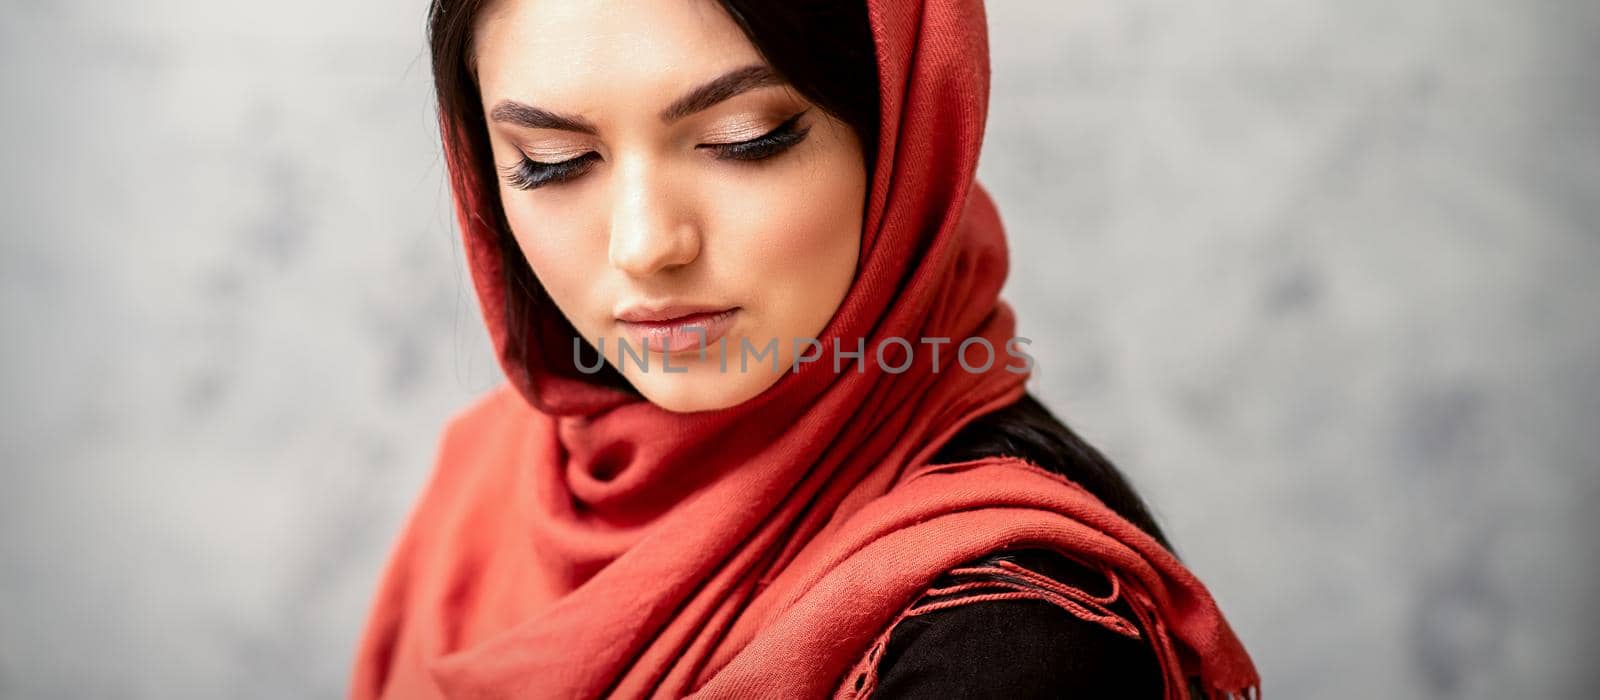 The fashionable young woman. Portrait of the beautiful female model with long hair and makeup with eyelash extensions in a red scarf. Beauty young caucasian woman on the background of a gray wall